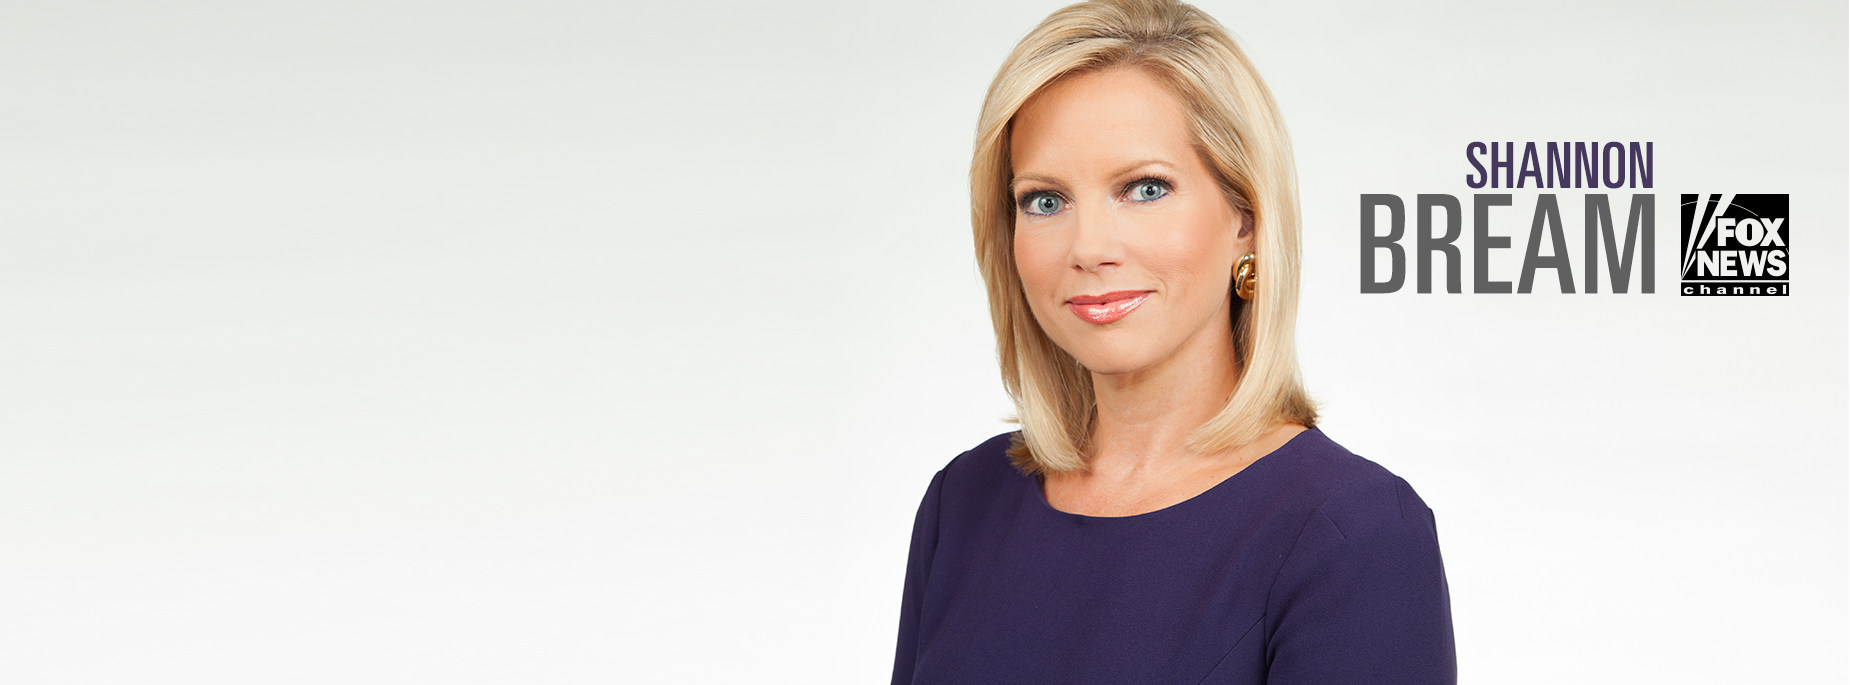 Shannon bream height is 5 feet 7 inches. 